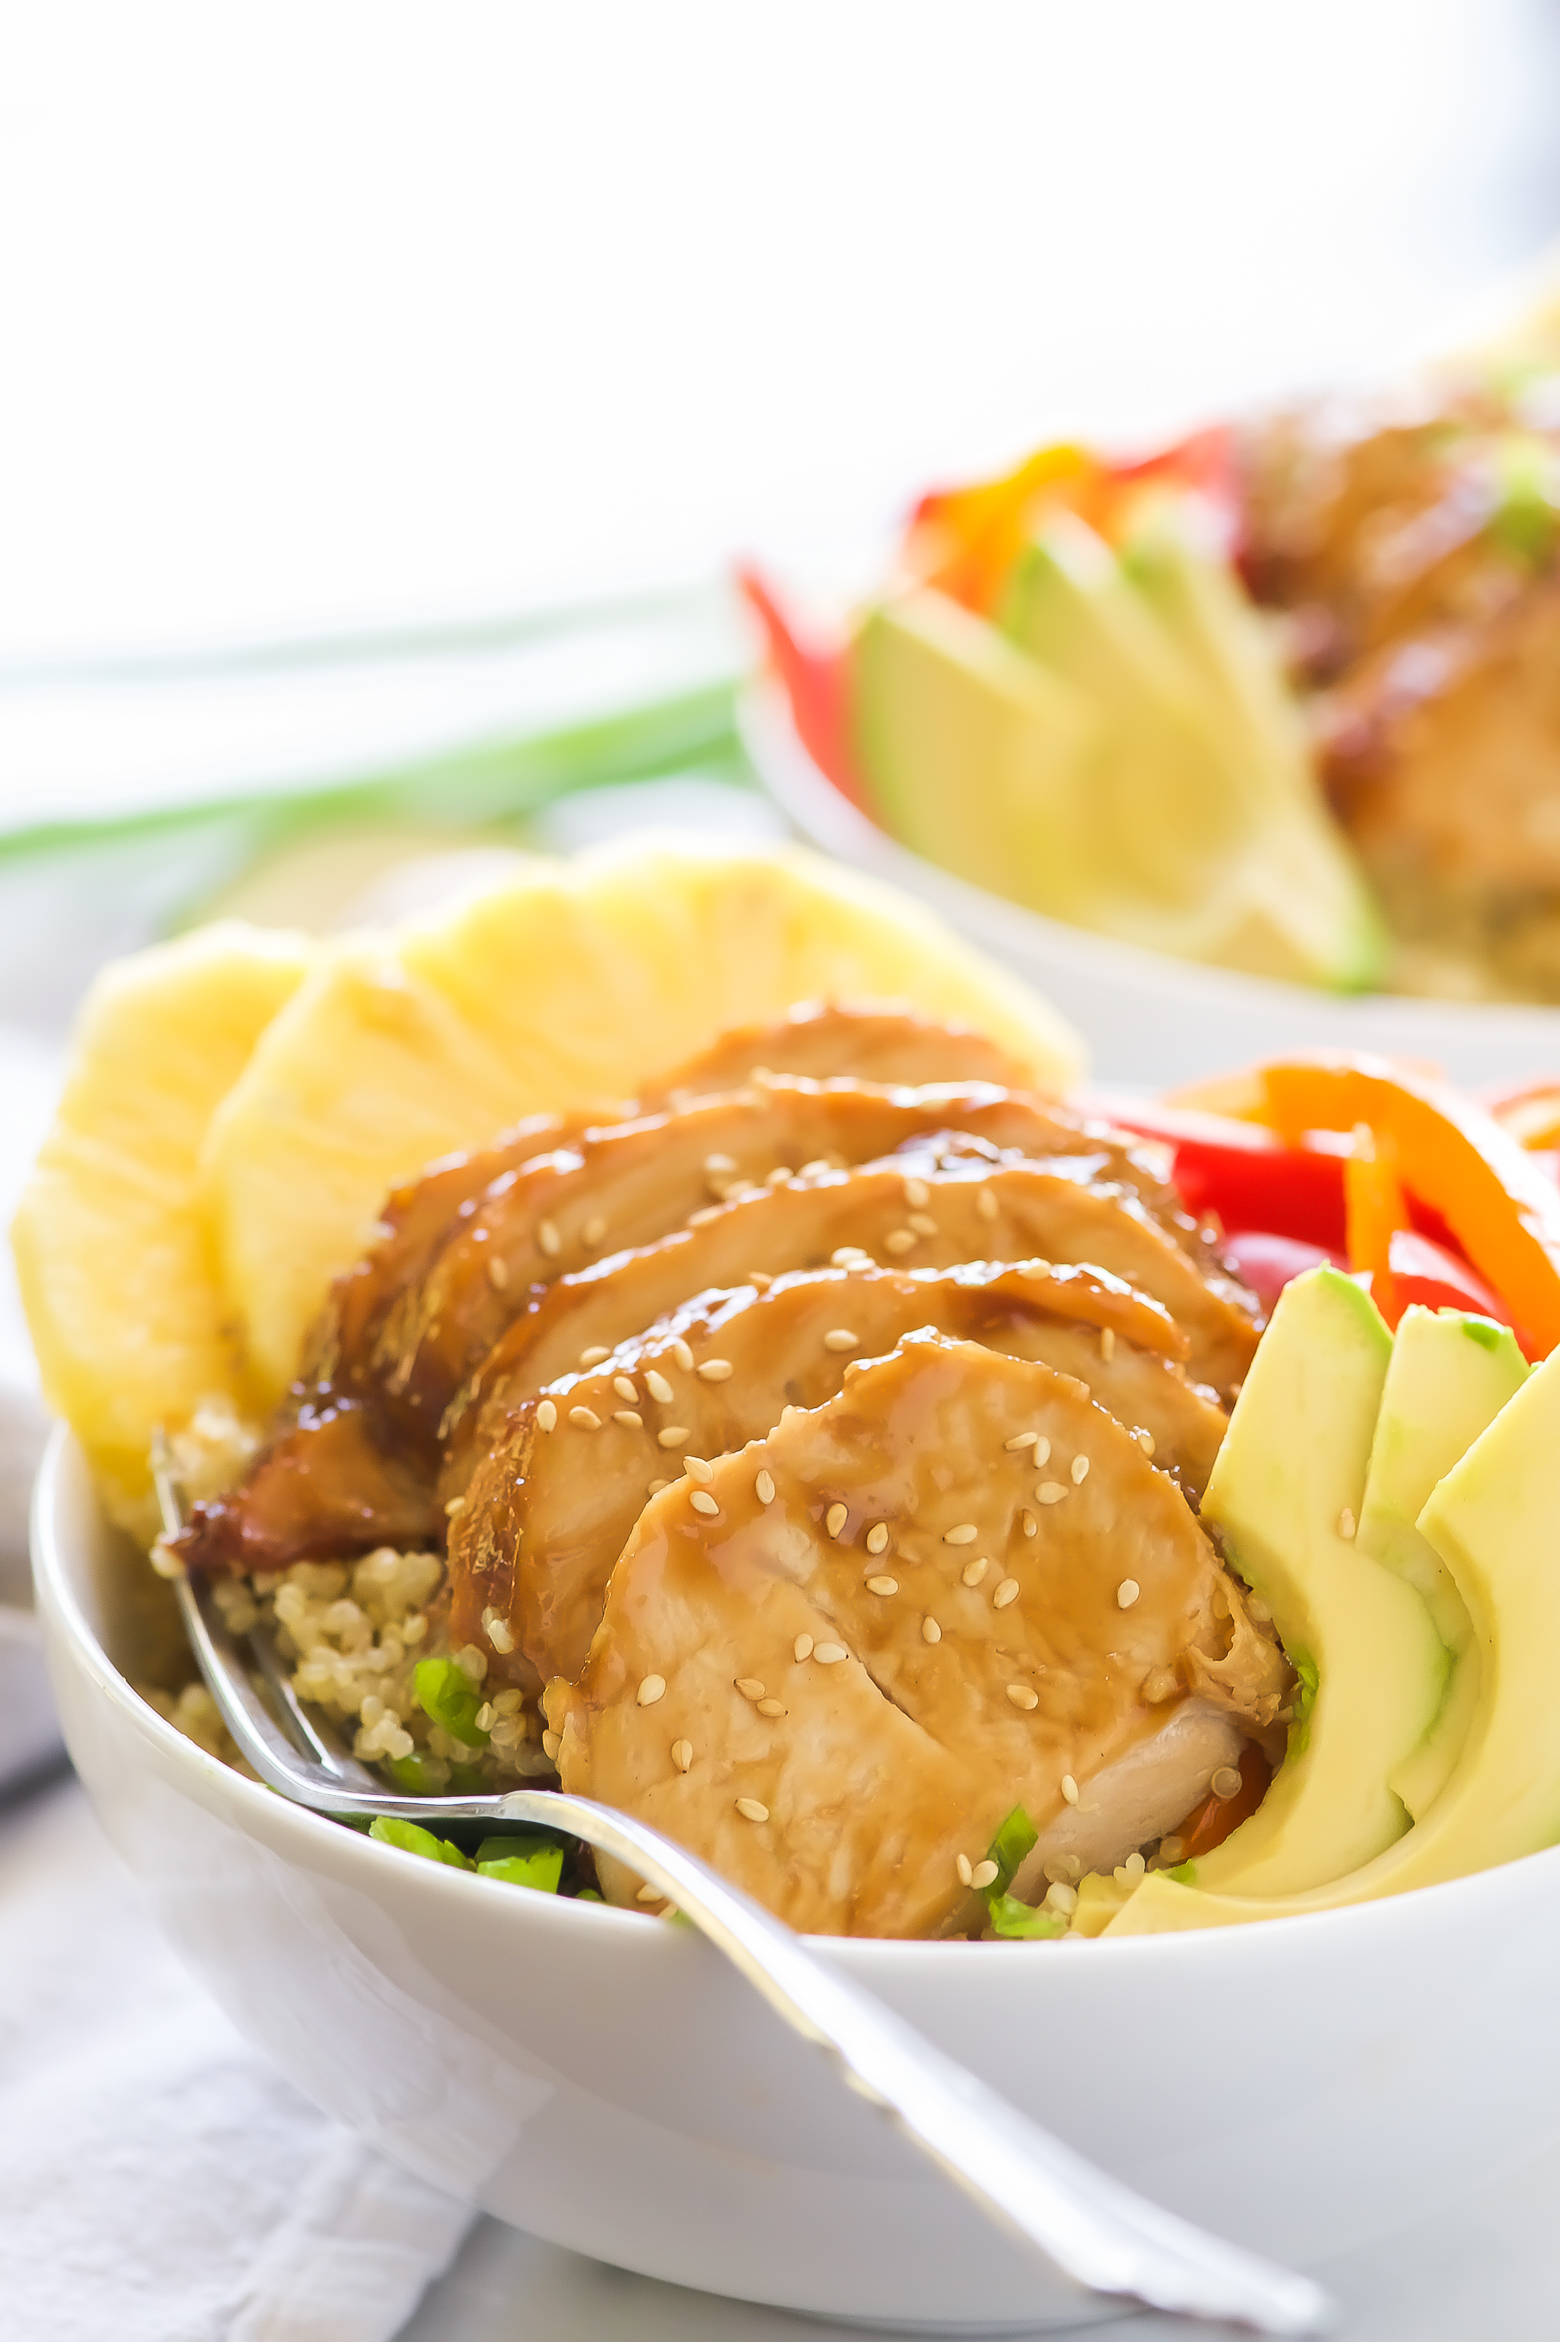 Honey Soy Glazed Hawaiian Bowls pack a serious flavor punch! Honey soy glazed turkey tenderloins are baked then added to bowl filled with rice, juicy pineapple, peppers, onions, and avocados. This one dish wonder is perfect for any weeknight dinner!